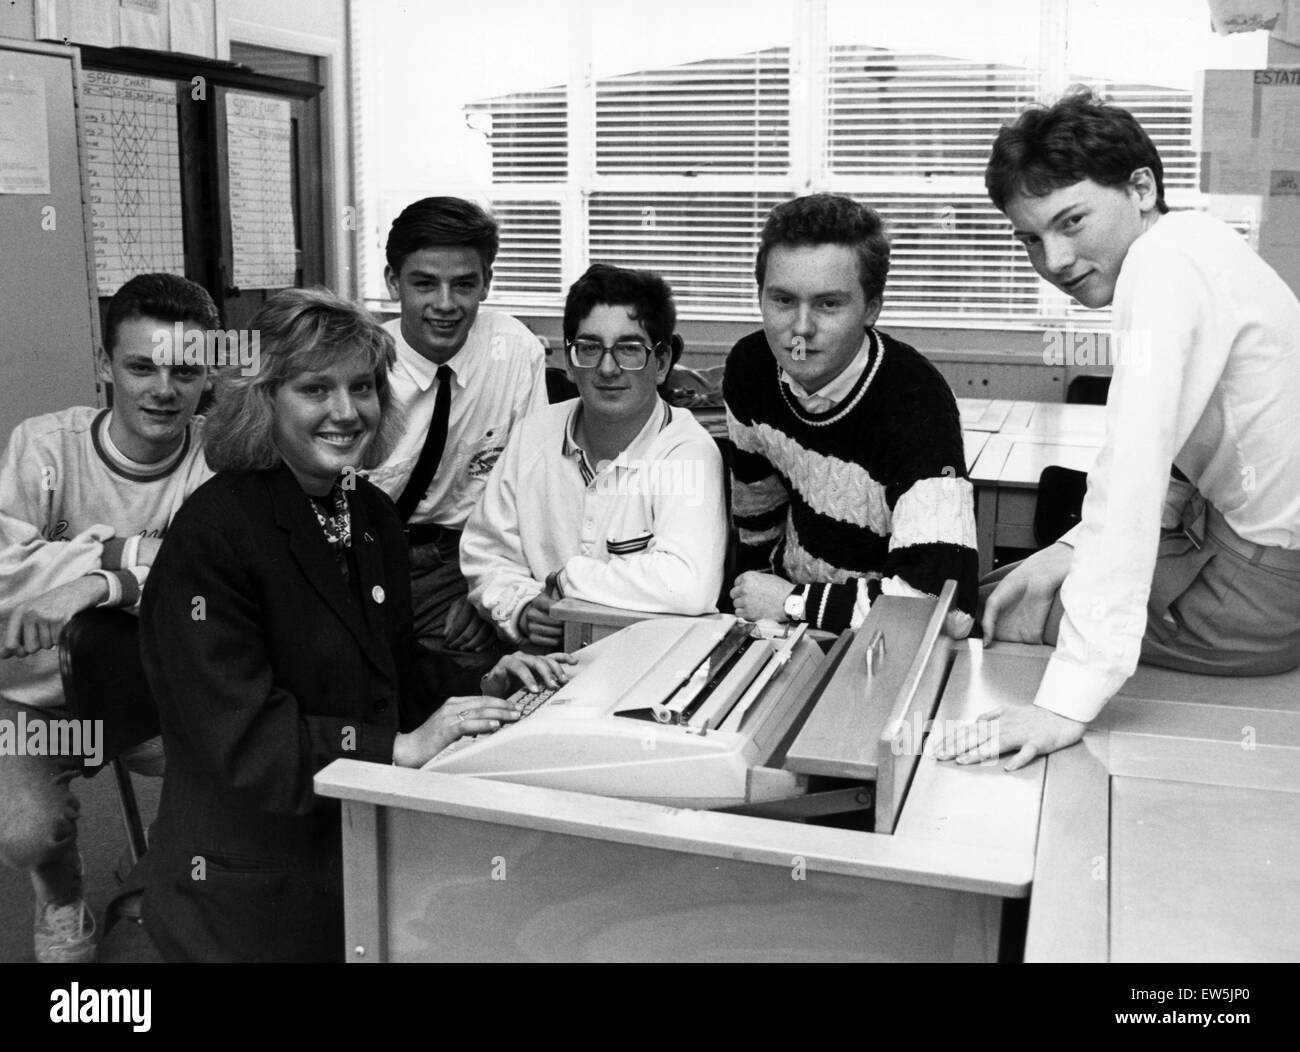 Students from St Mary's Sixth Form College, Middlesbrough, 4th October 1988. They have set up a company to produce a magazine. They are aiming to churn out up to 400 first editions by November, a racy mixture of current affairs and student related issues. Stock Photo